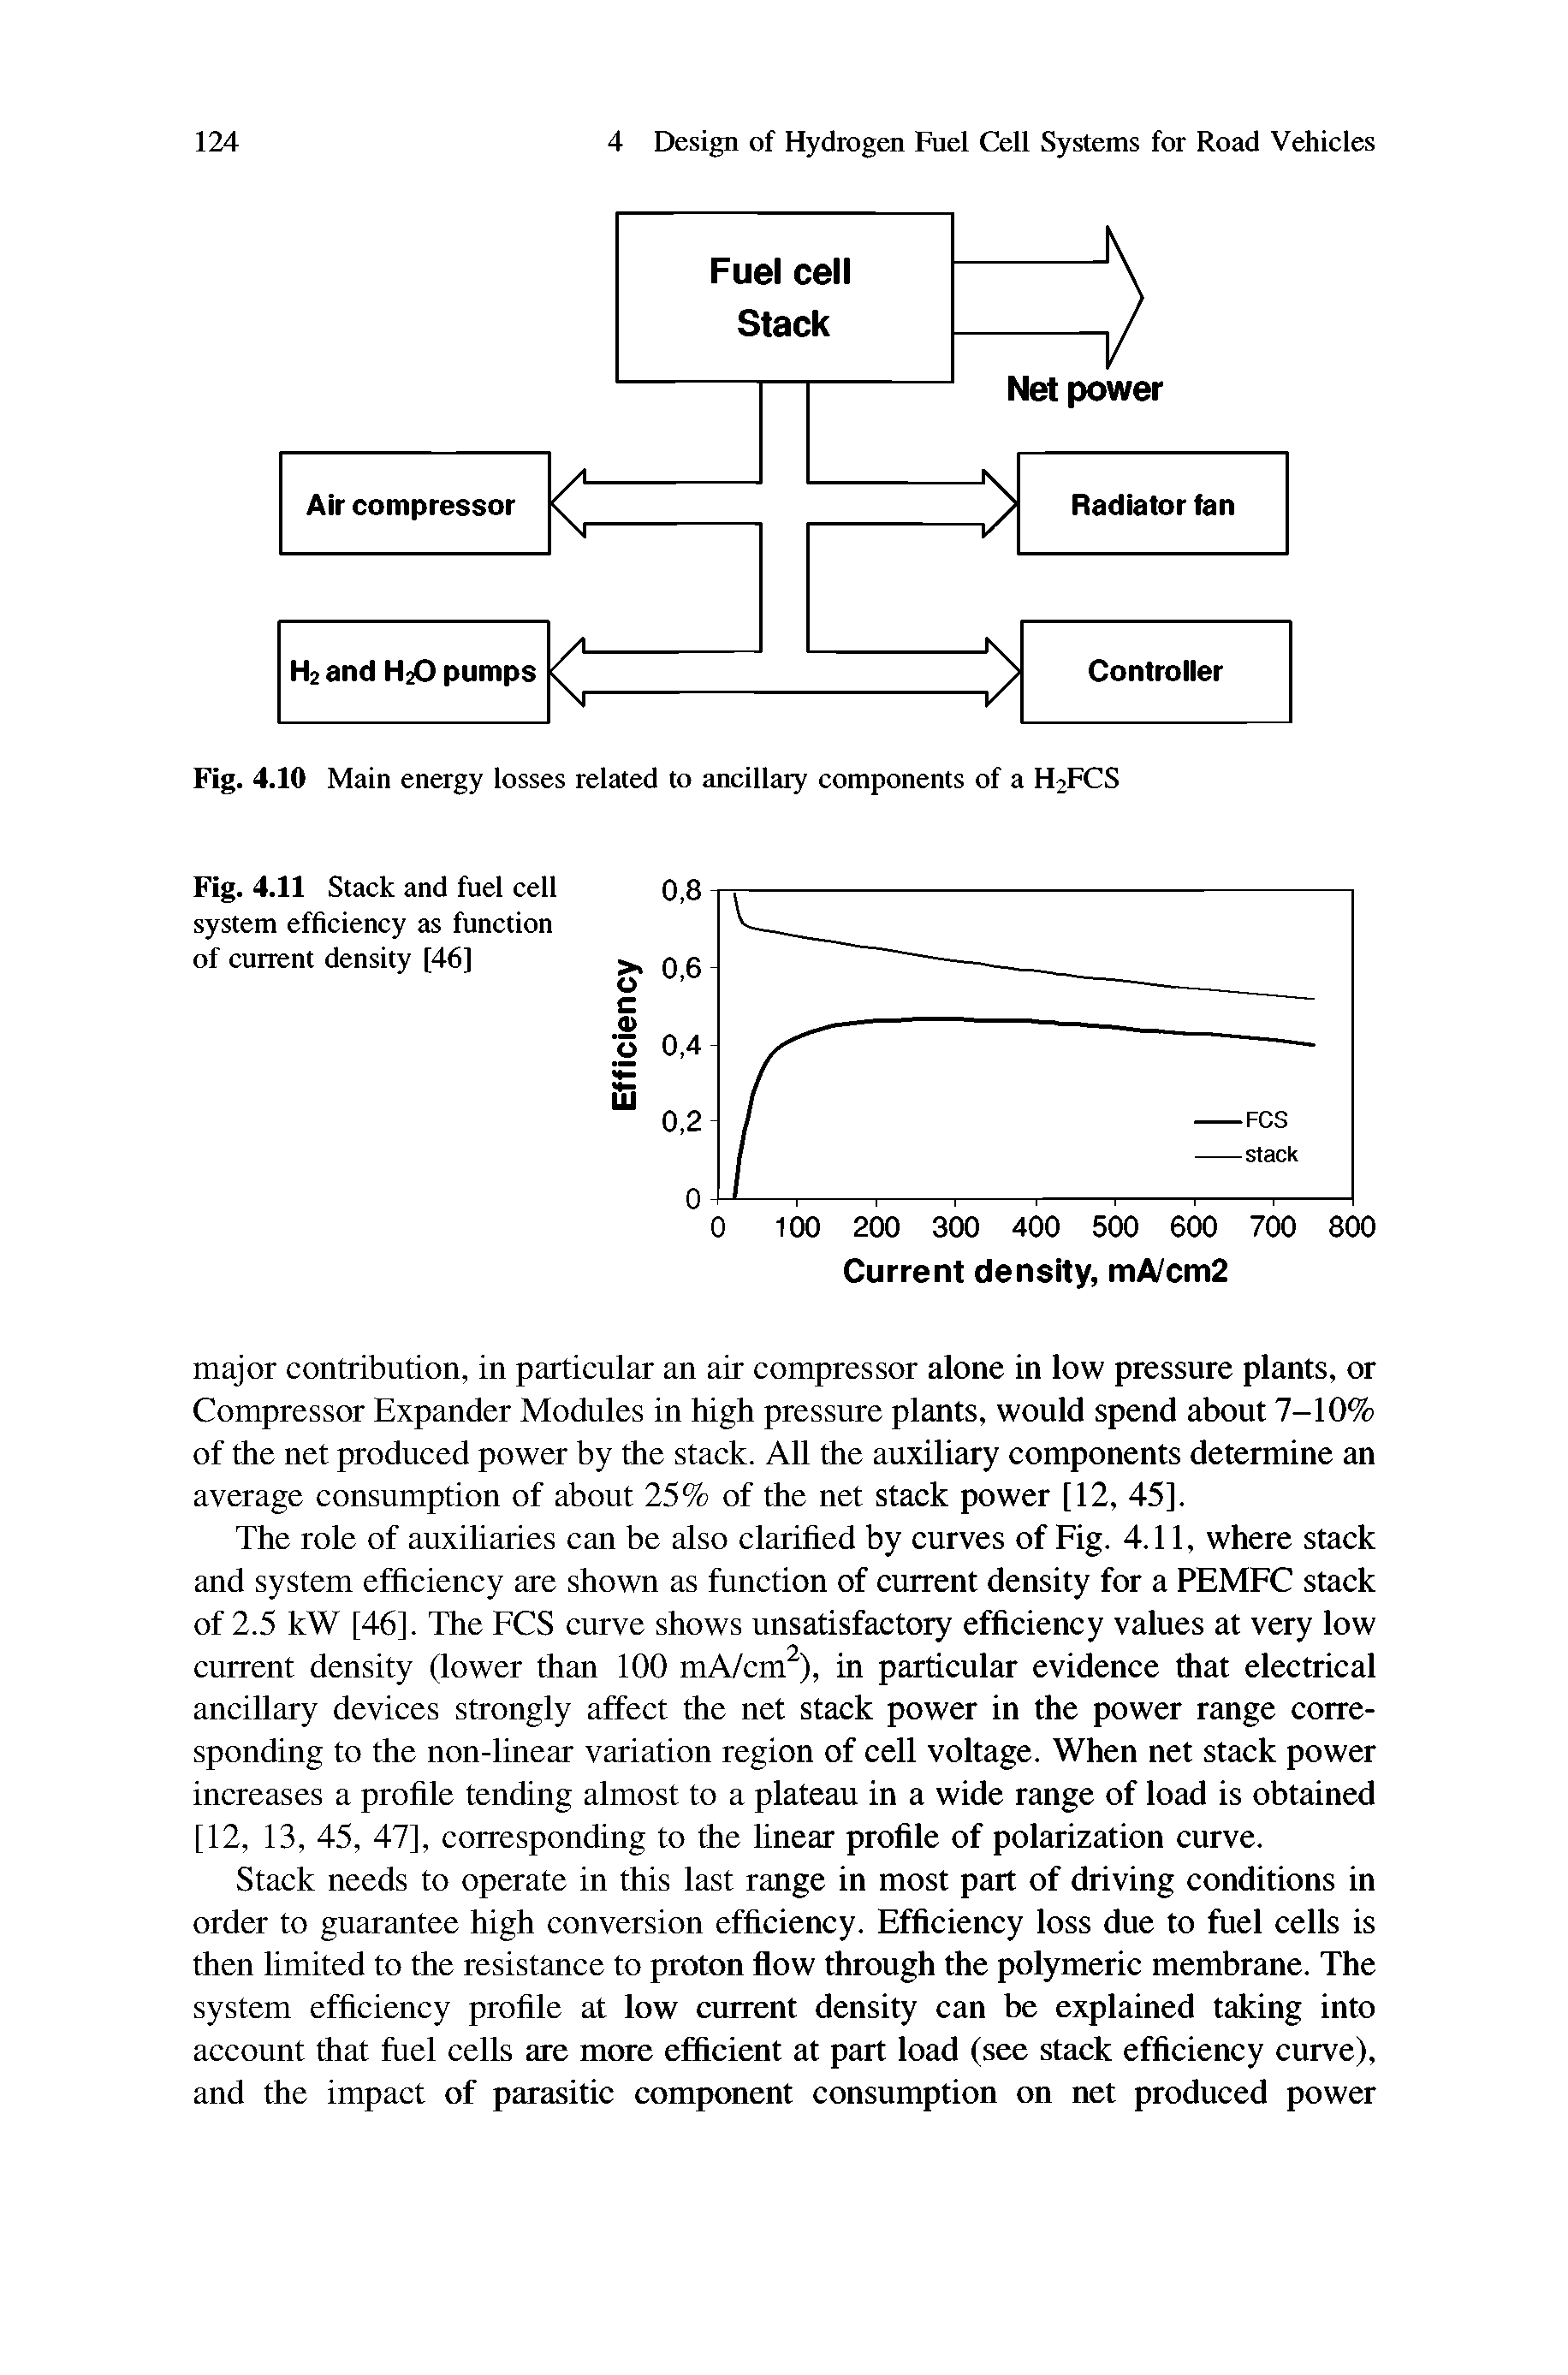 Fig. 4.10 Main energy losses related to ancillary components of a HiFCS...